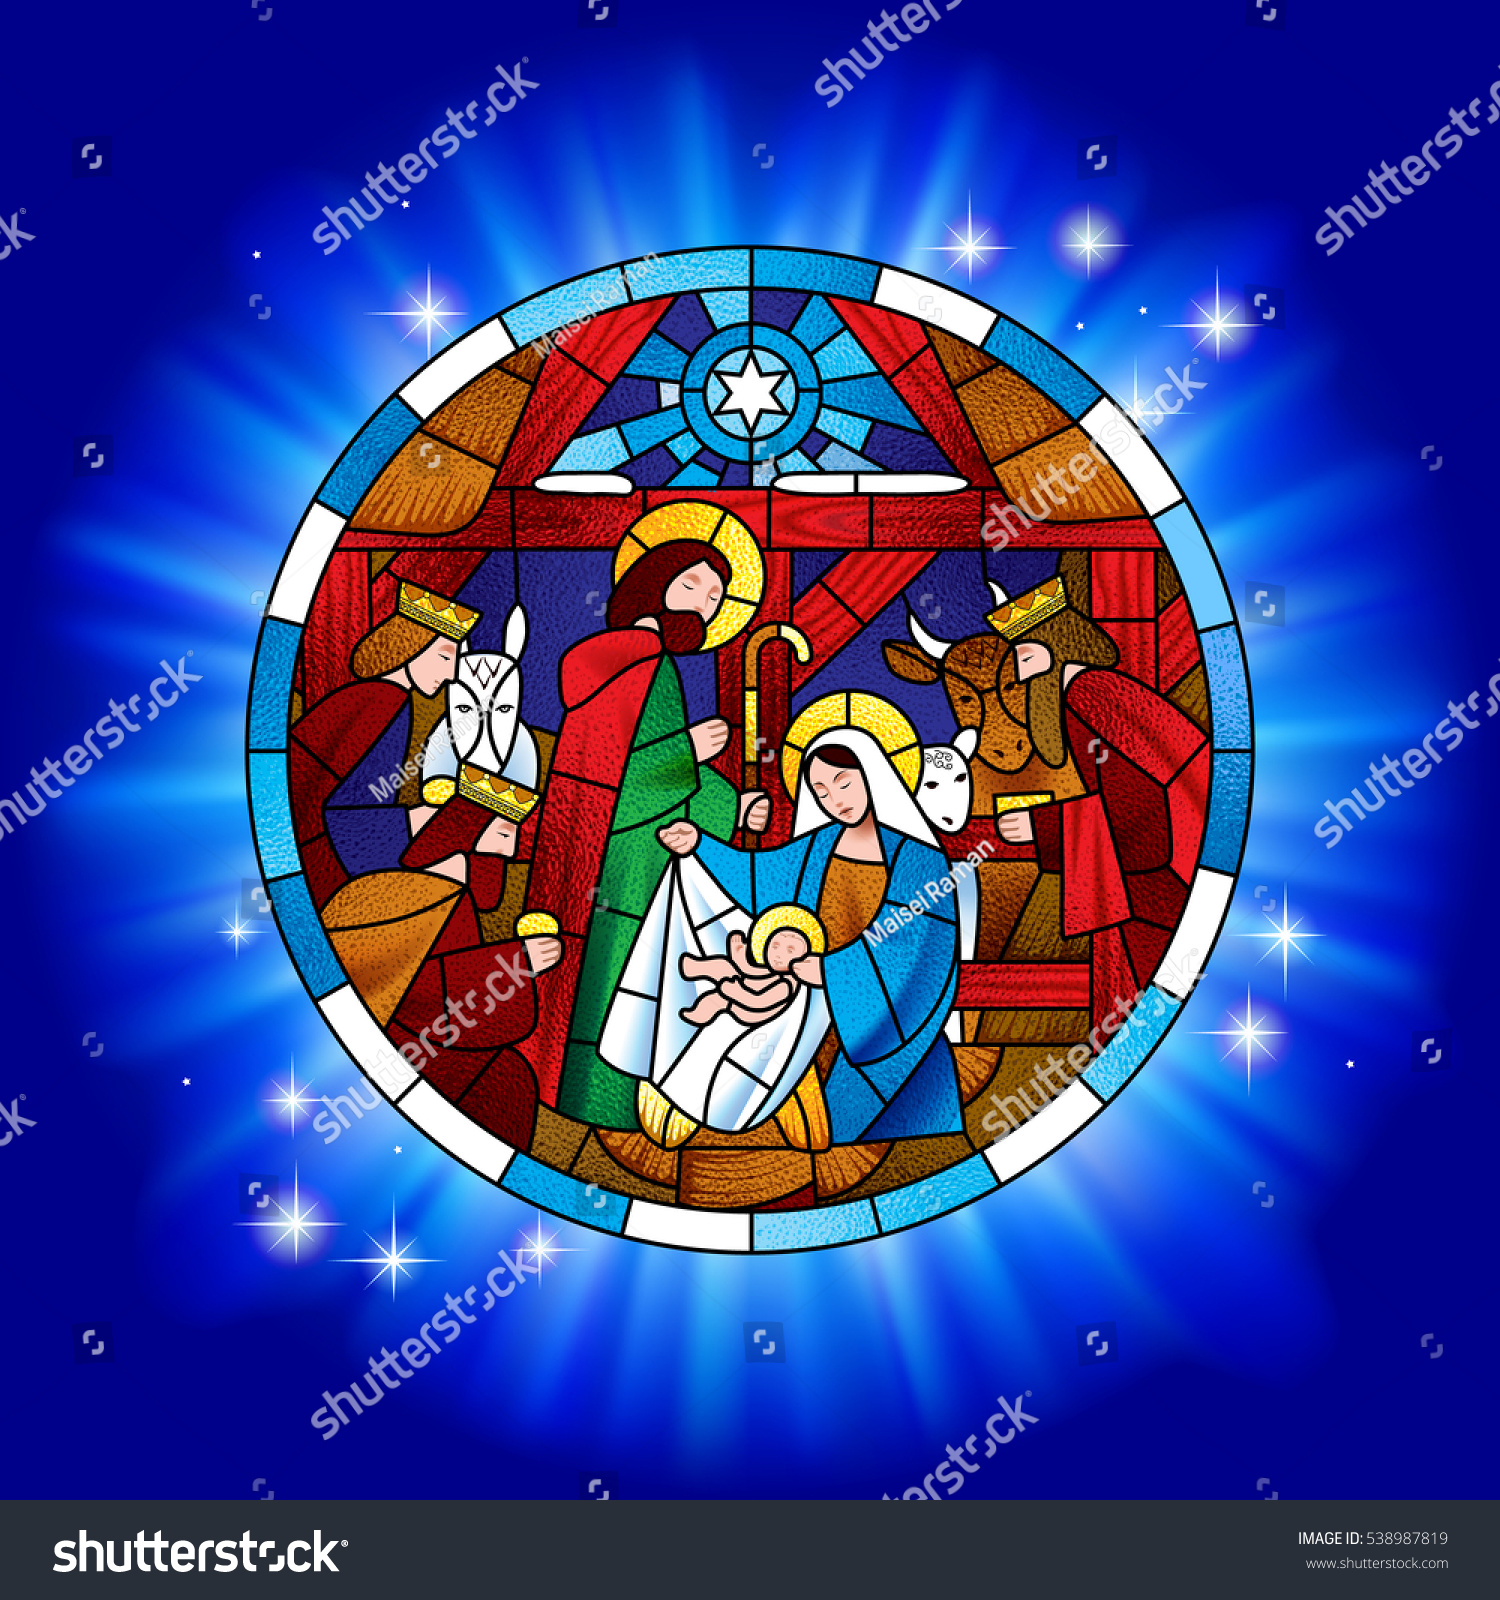 Circle Stained Glass Christmas Adoration Magi Stock Vector 538987819 ...